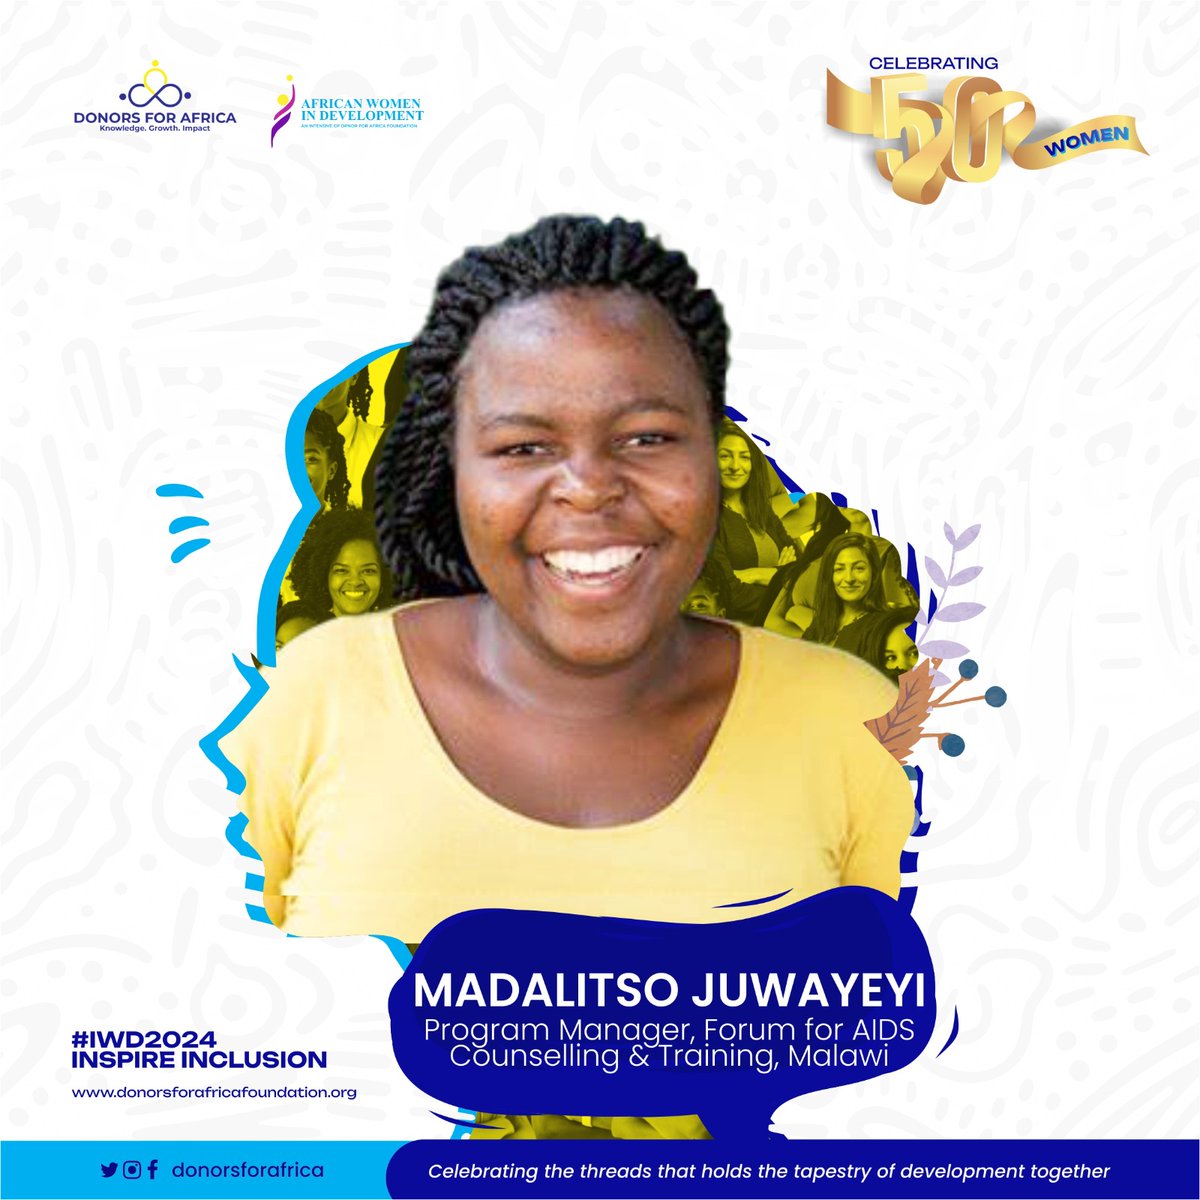 Congratulations Madalitso Juwayeyi, our Programs Manager, for being chosen as one of the 50 African Women in Development by @donorsforafrica from 1700+ nominations across 34 African countries. This recognition from AWID celebrates African women leading global development efforts.